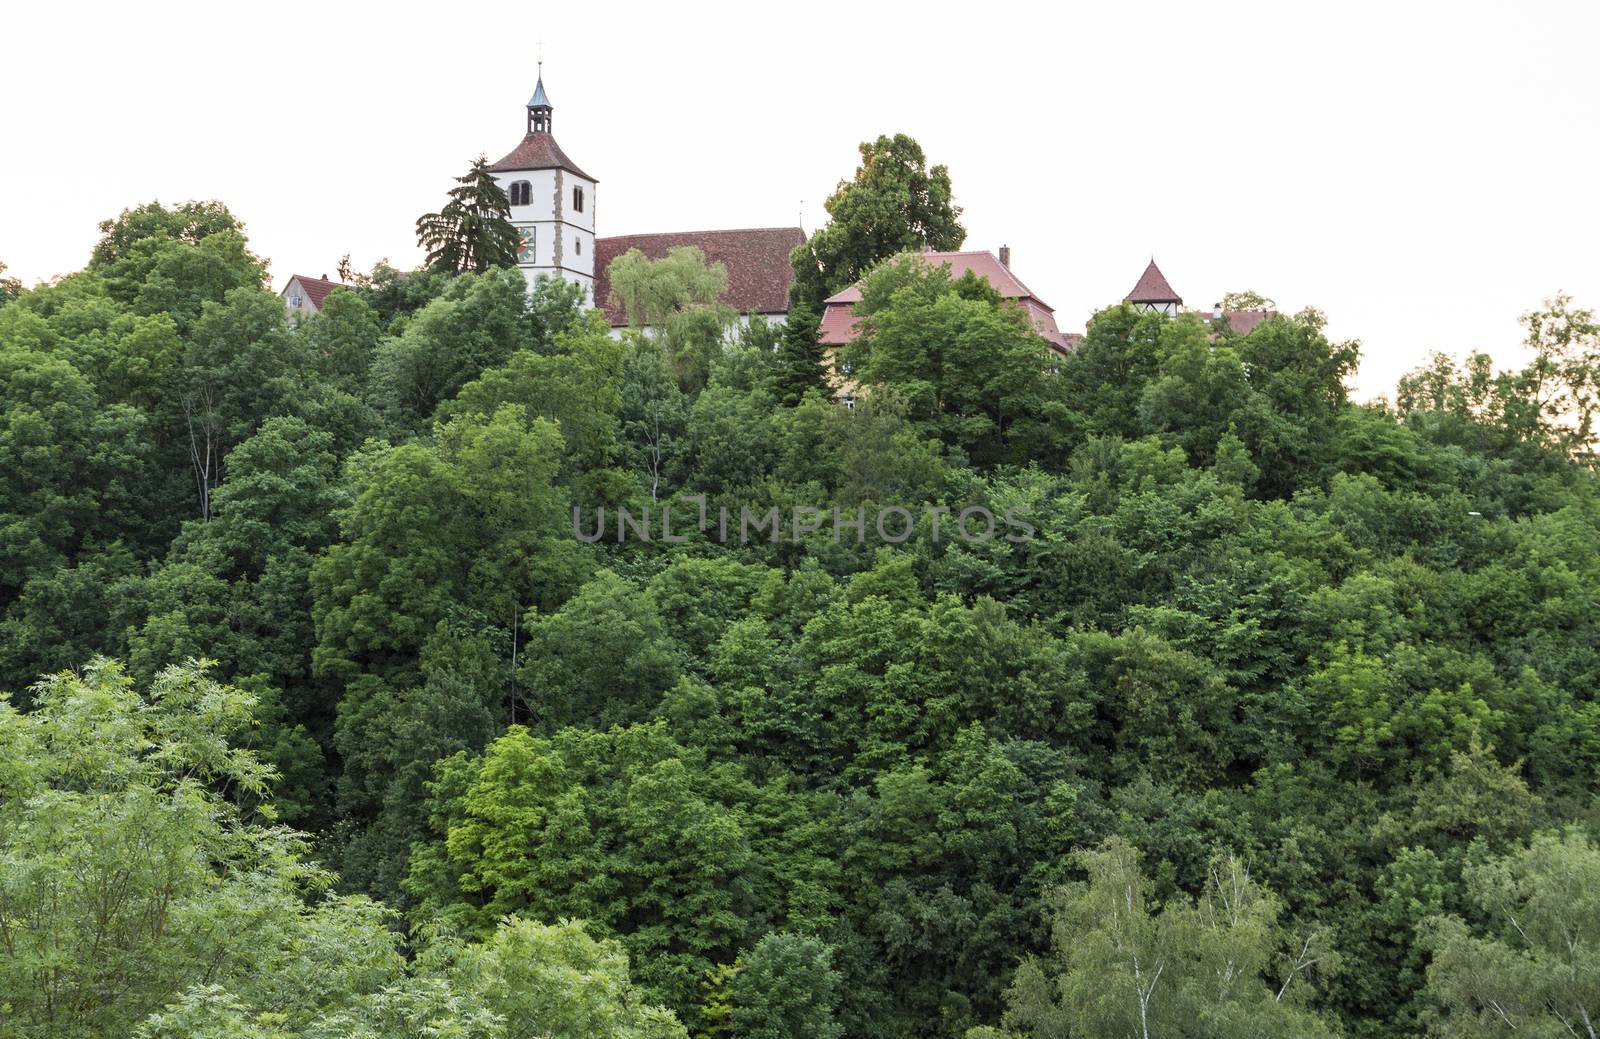 historical building hidden behind trees by gewoldi